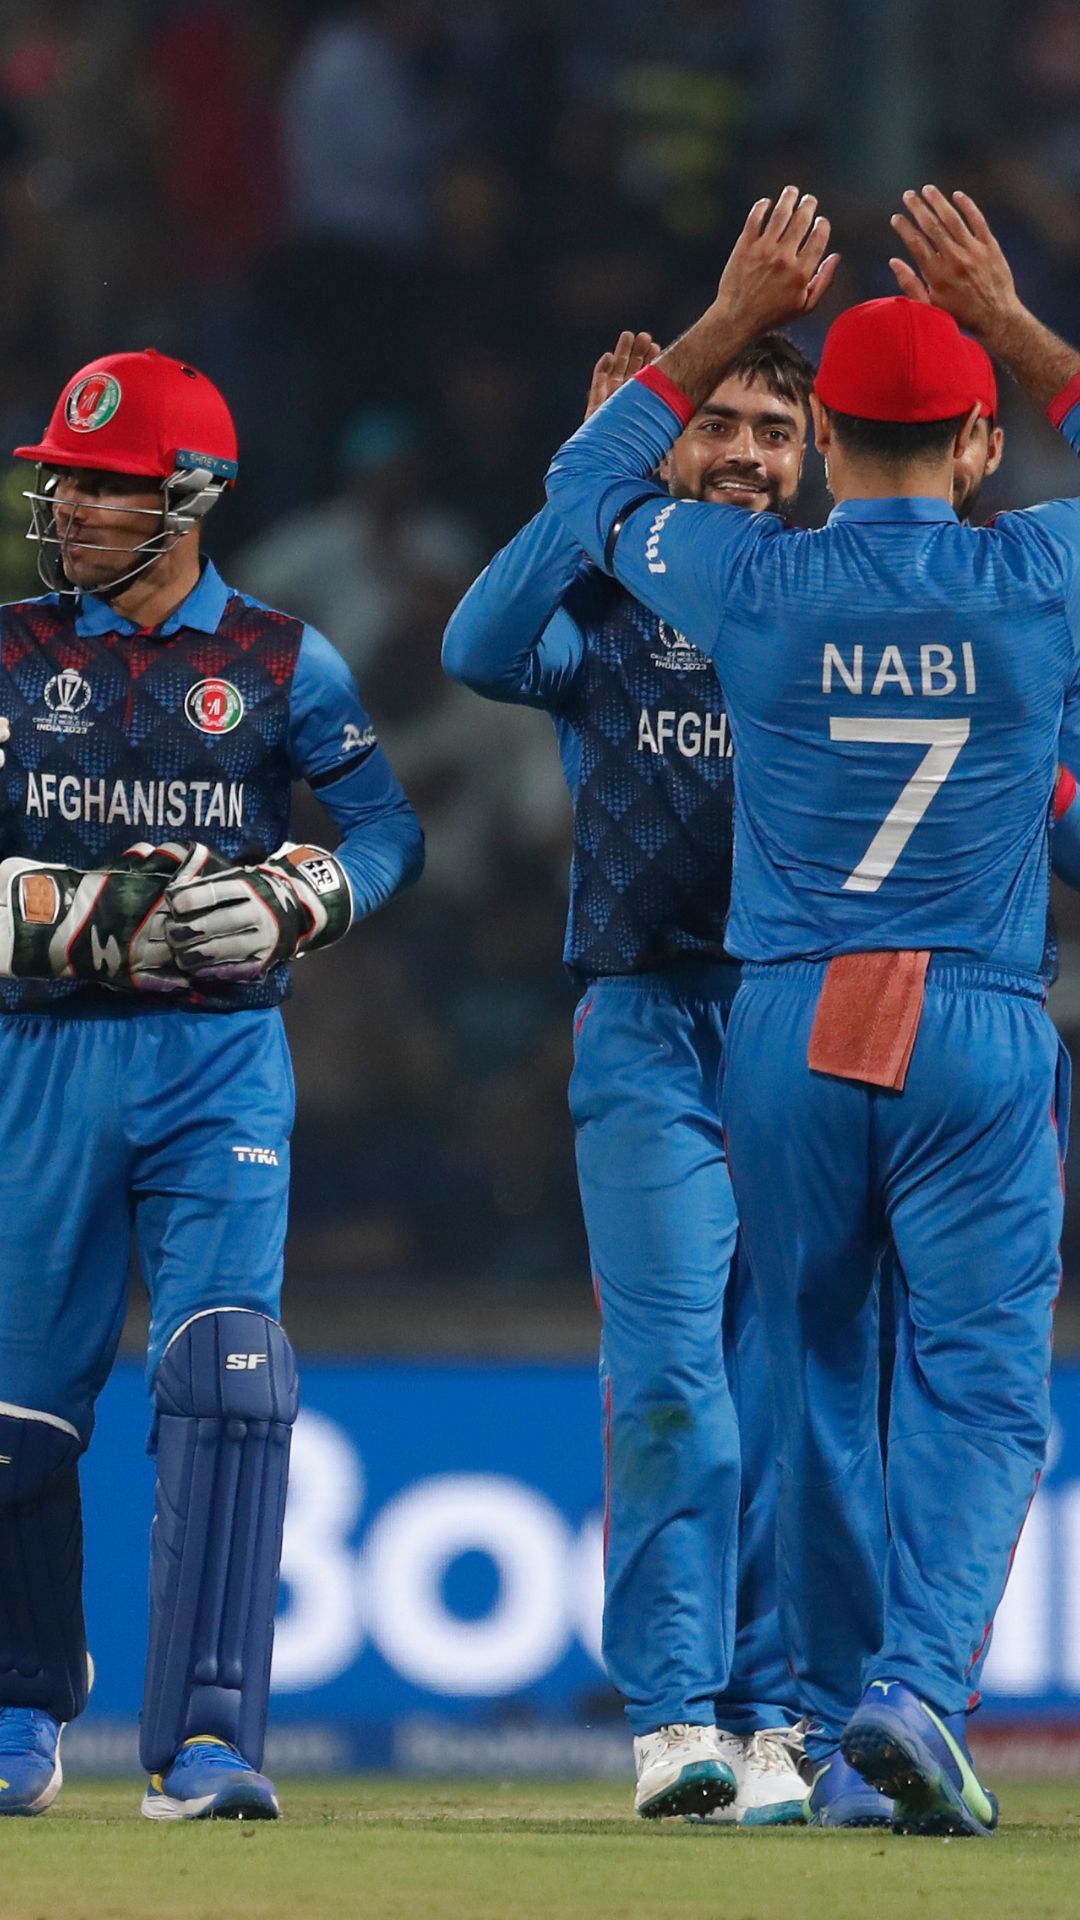 9 Teams that have already qualified for T20 World Cup 2026